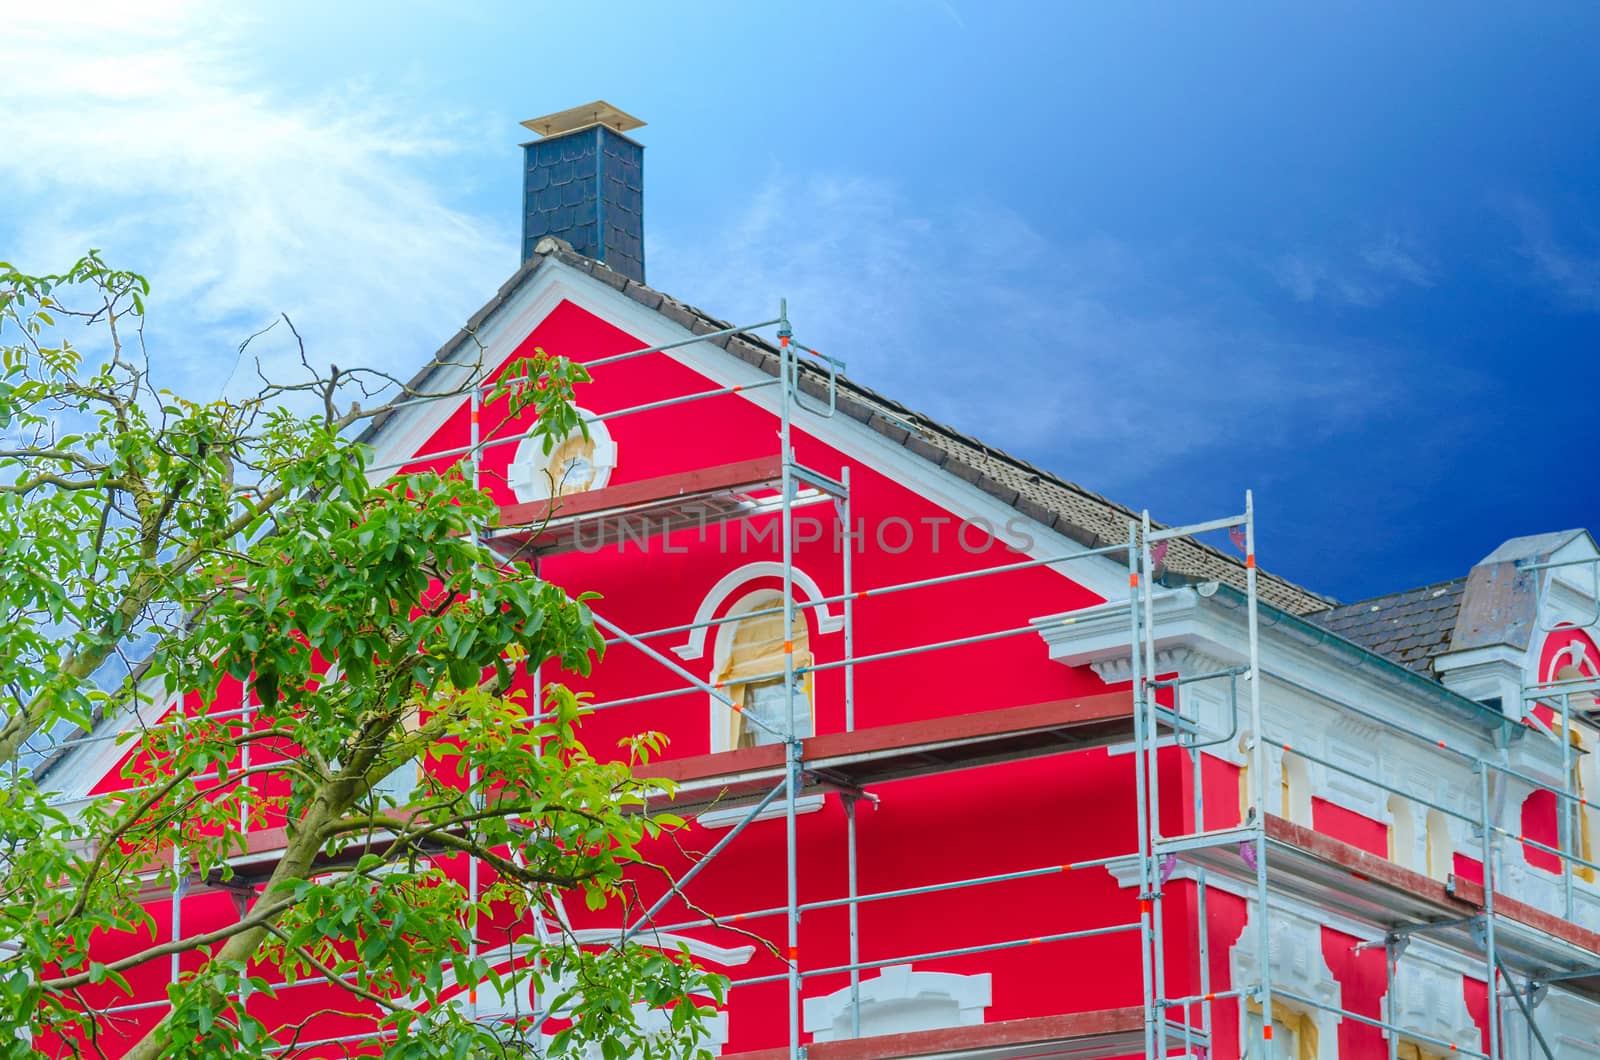 Detail red painted house facade with scaffolding in the background a dark blue sky.